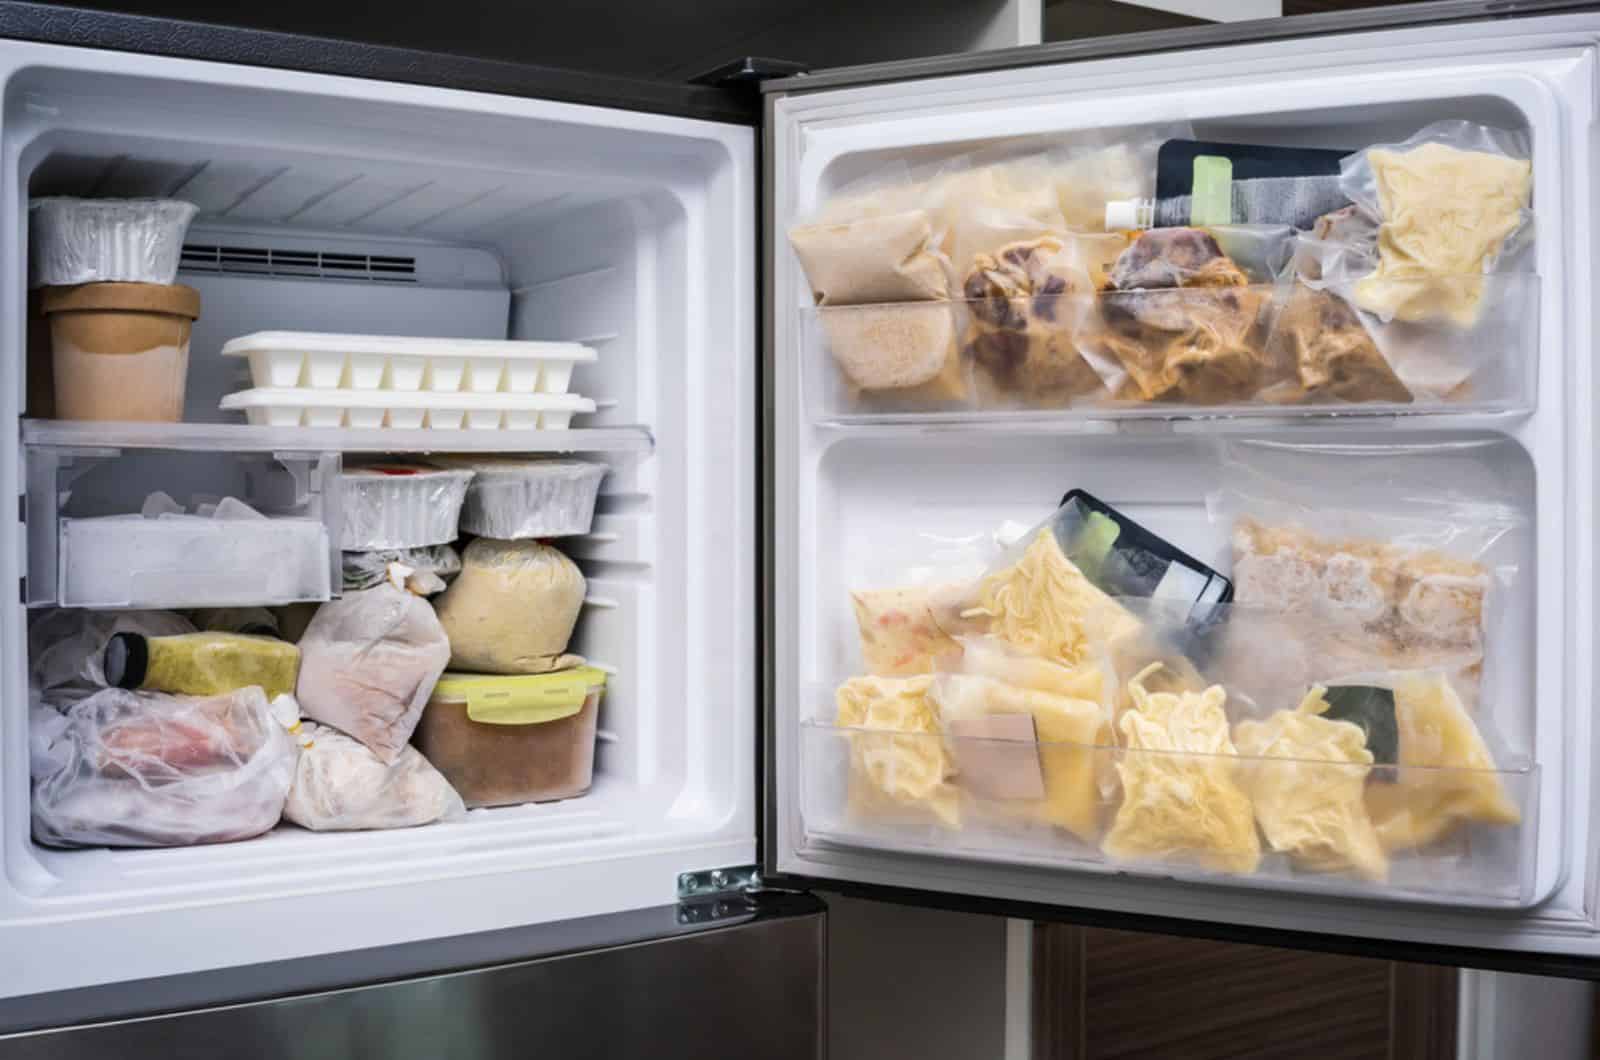 freezer of modern frigerator full with frozen food products